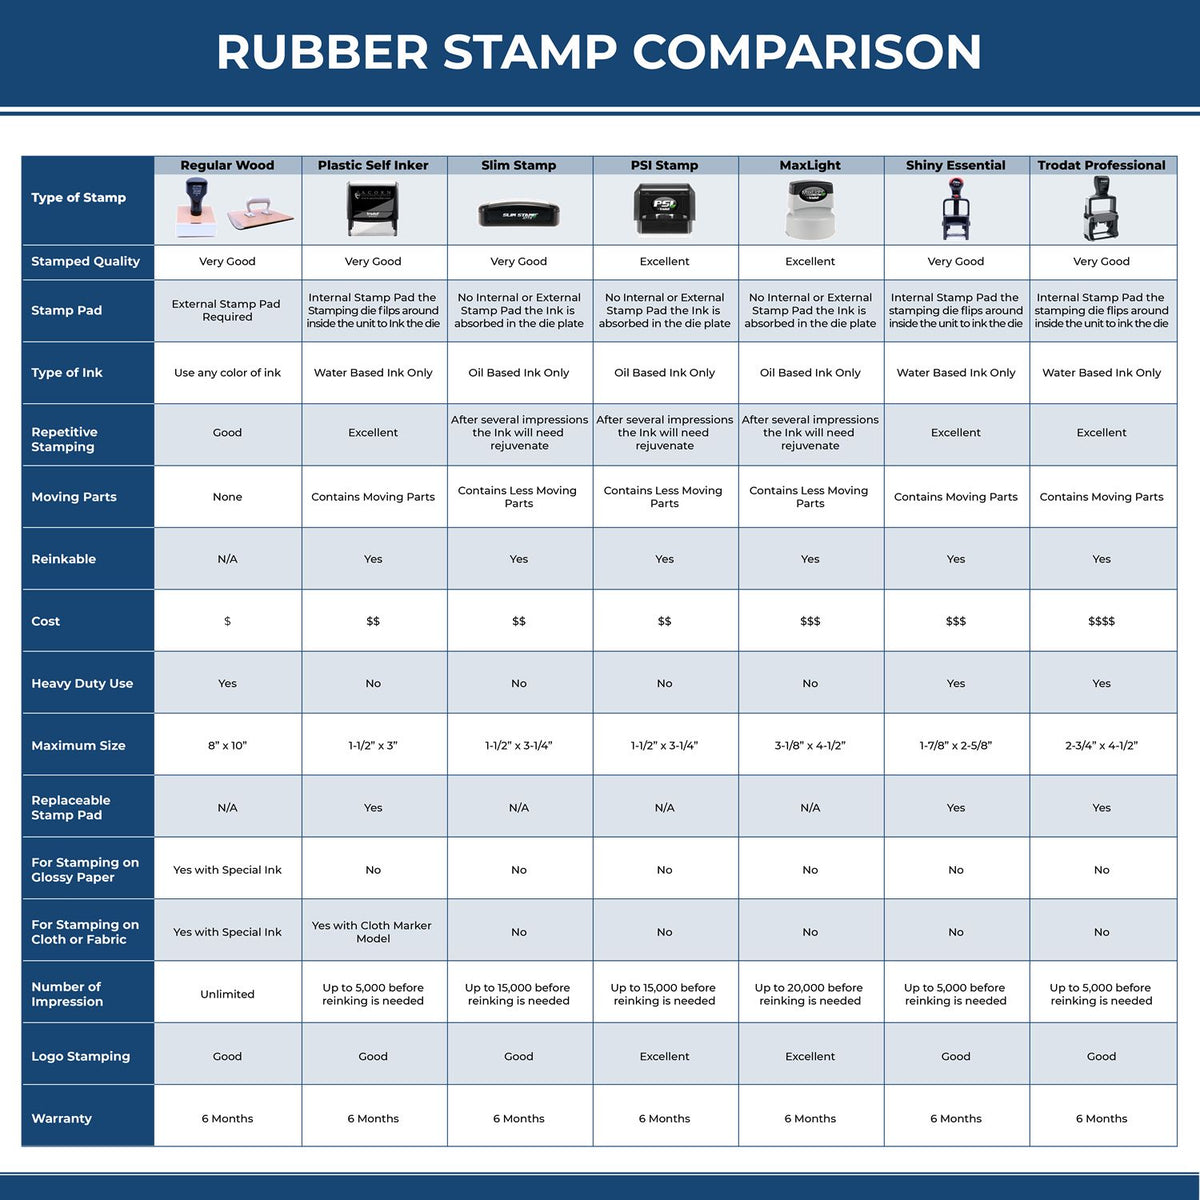 Large Self Inking Corrected Stamp 4678S Rubber Stamp Comparison